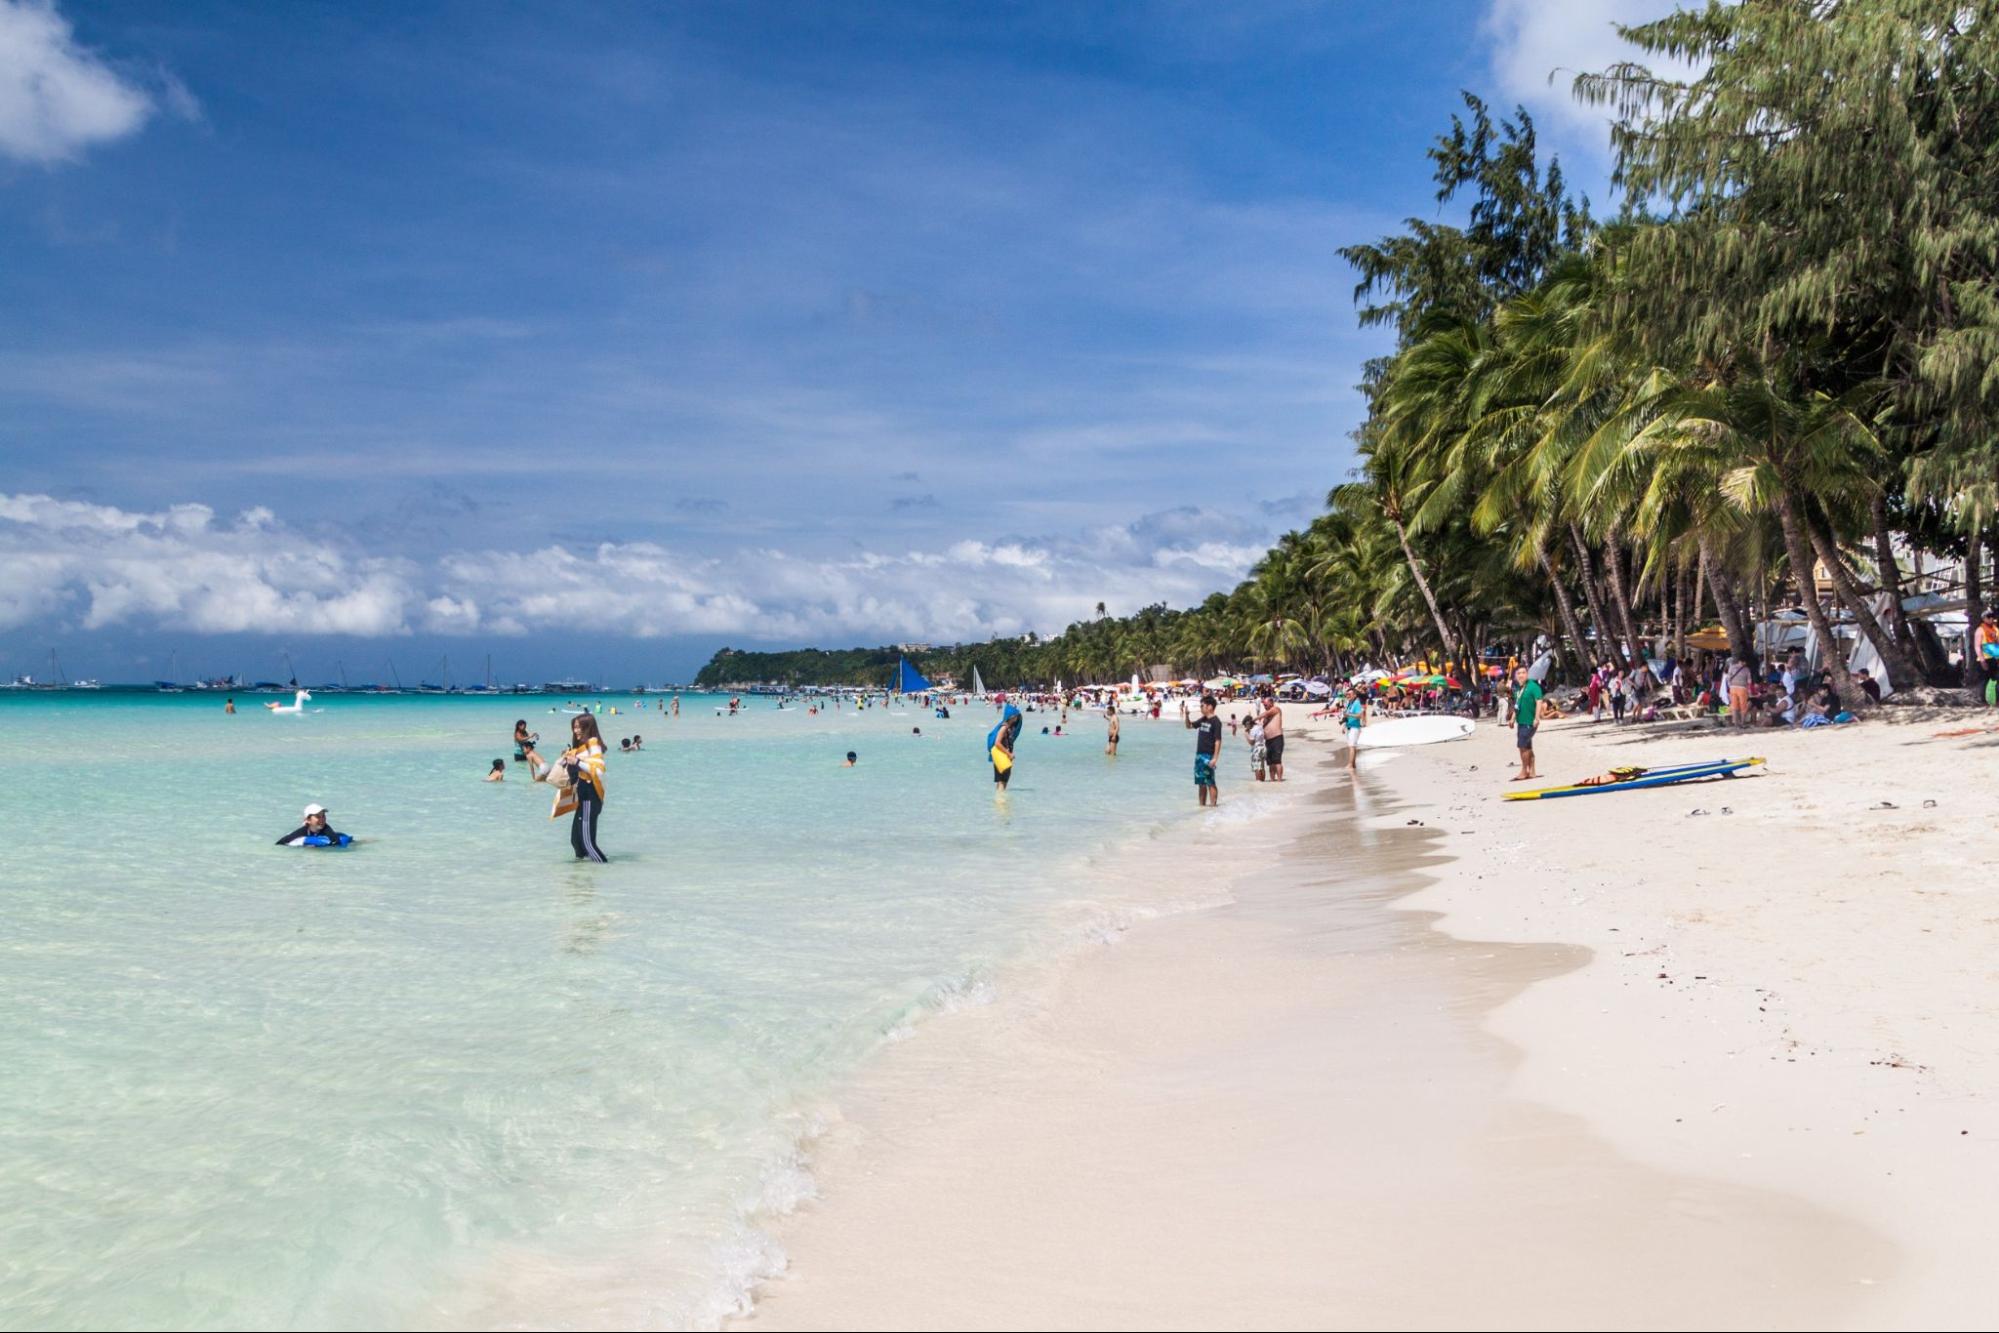 View of the White Beach at Boracay island, Philippines